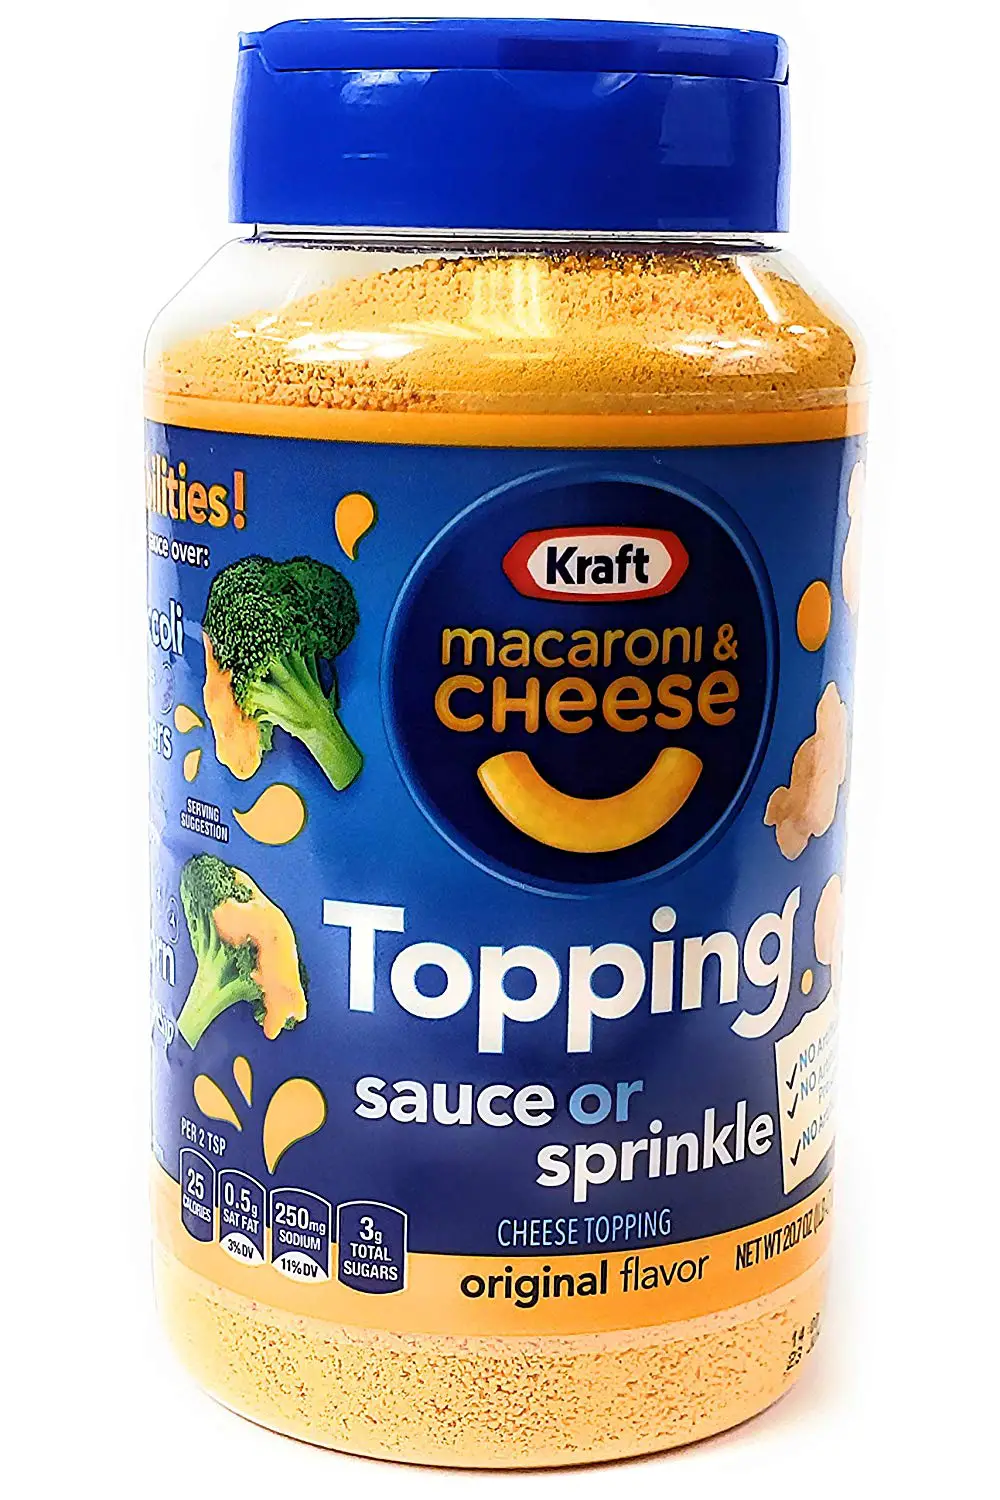 Kraft is Now Selling Macaroni and Cheese Powder